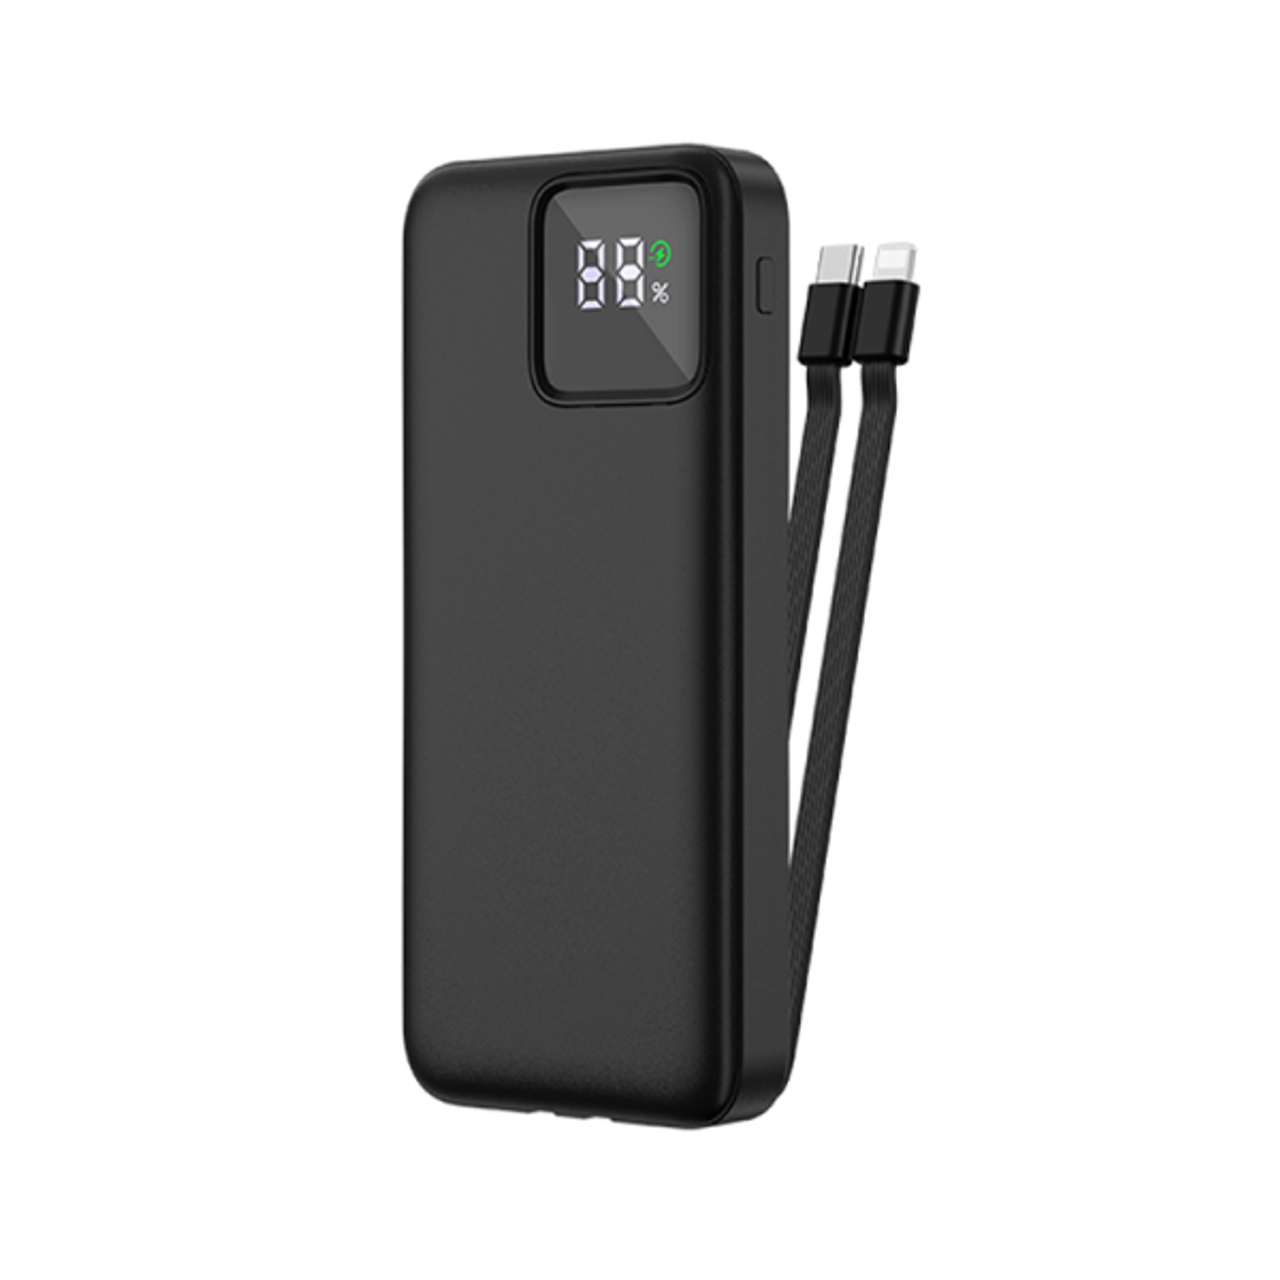 WiWU LED Display 22.5W 20000mAh Power Bank With Built-In Cable - Black, JC-22BLK, AYOUB COMPUTERS